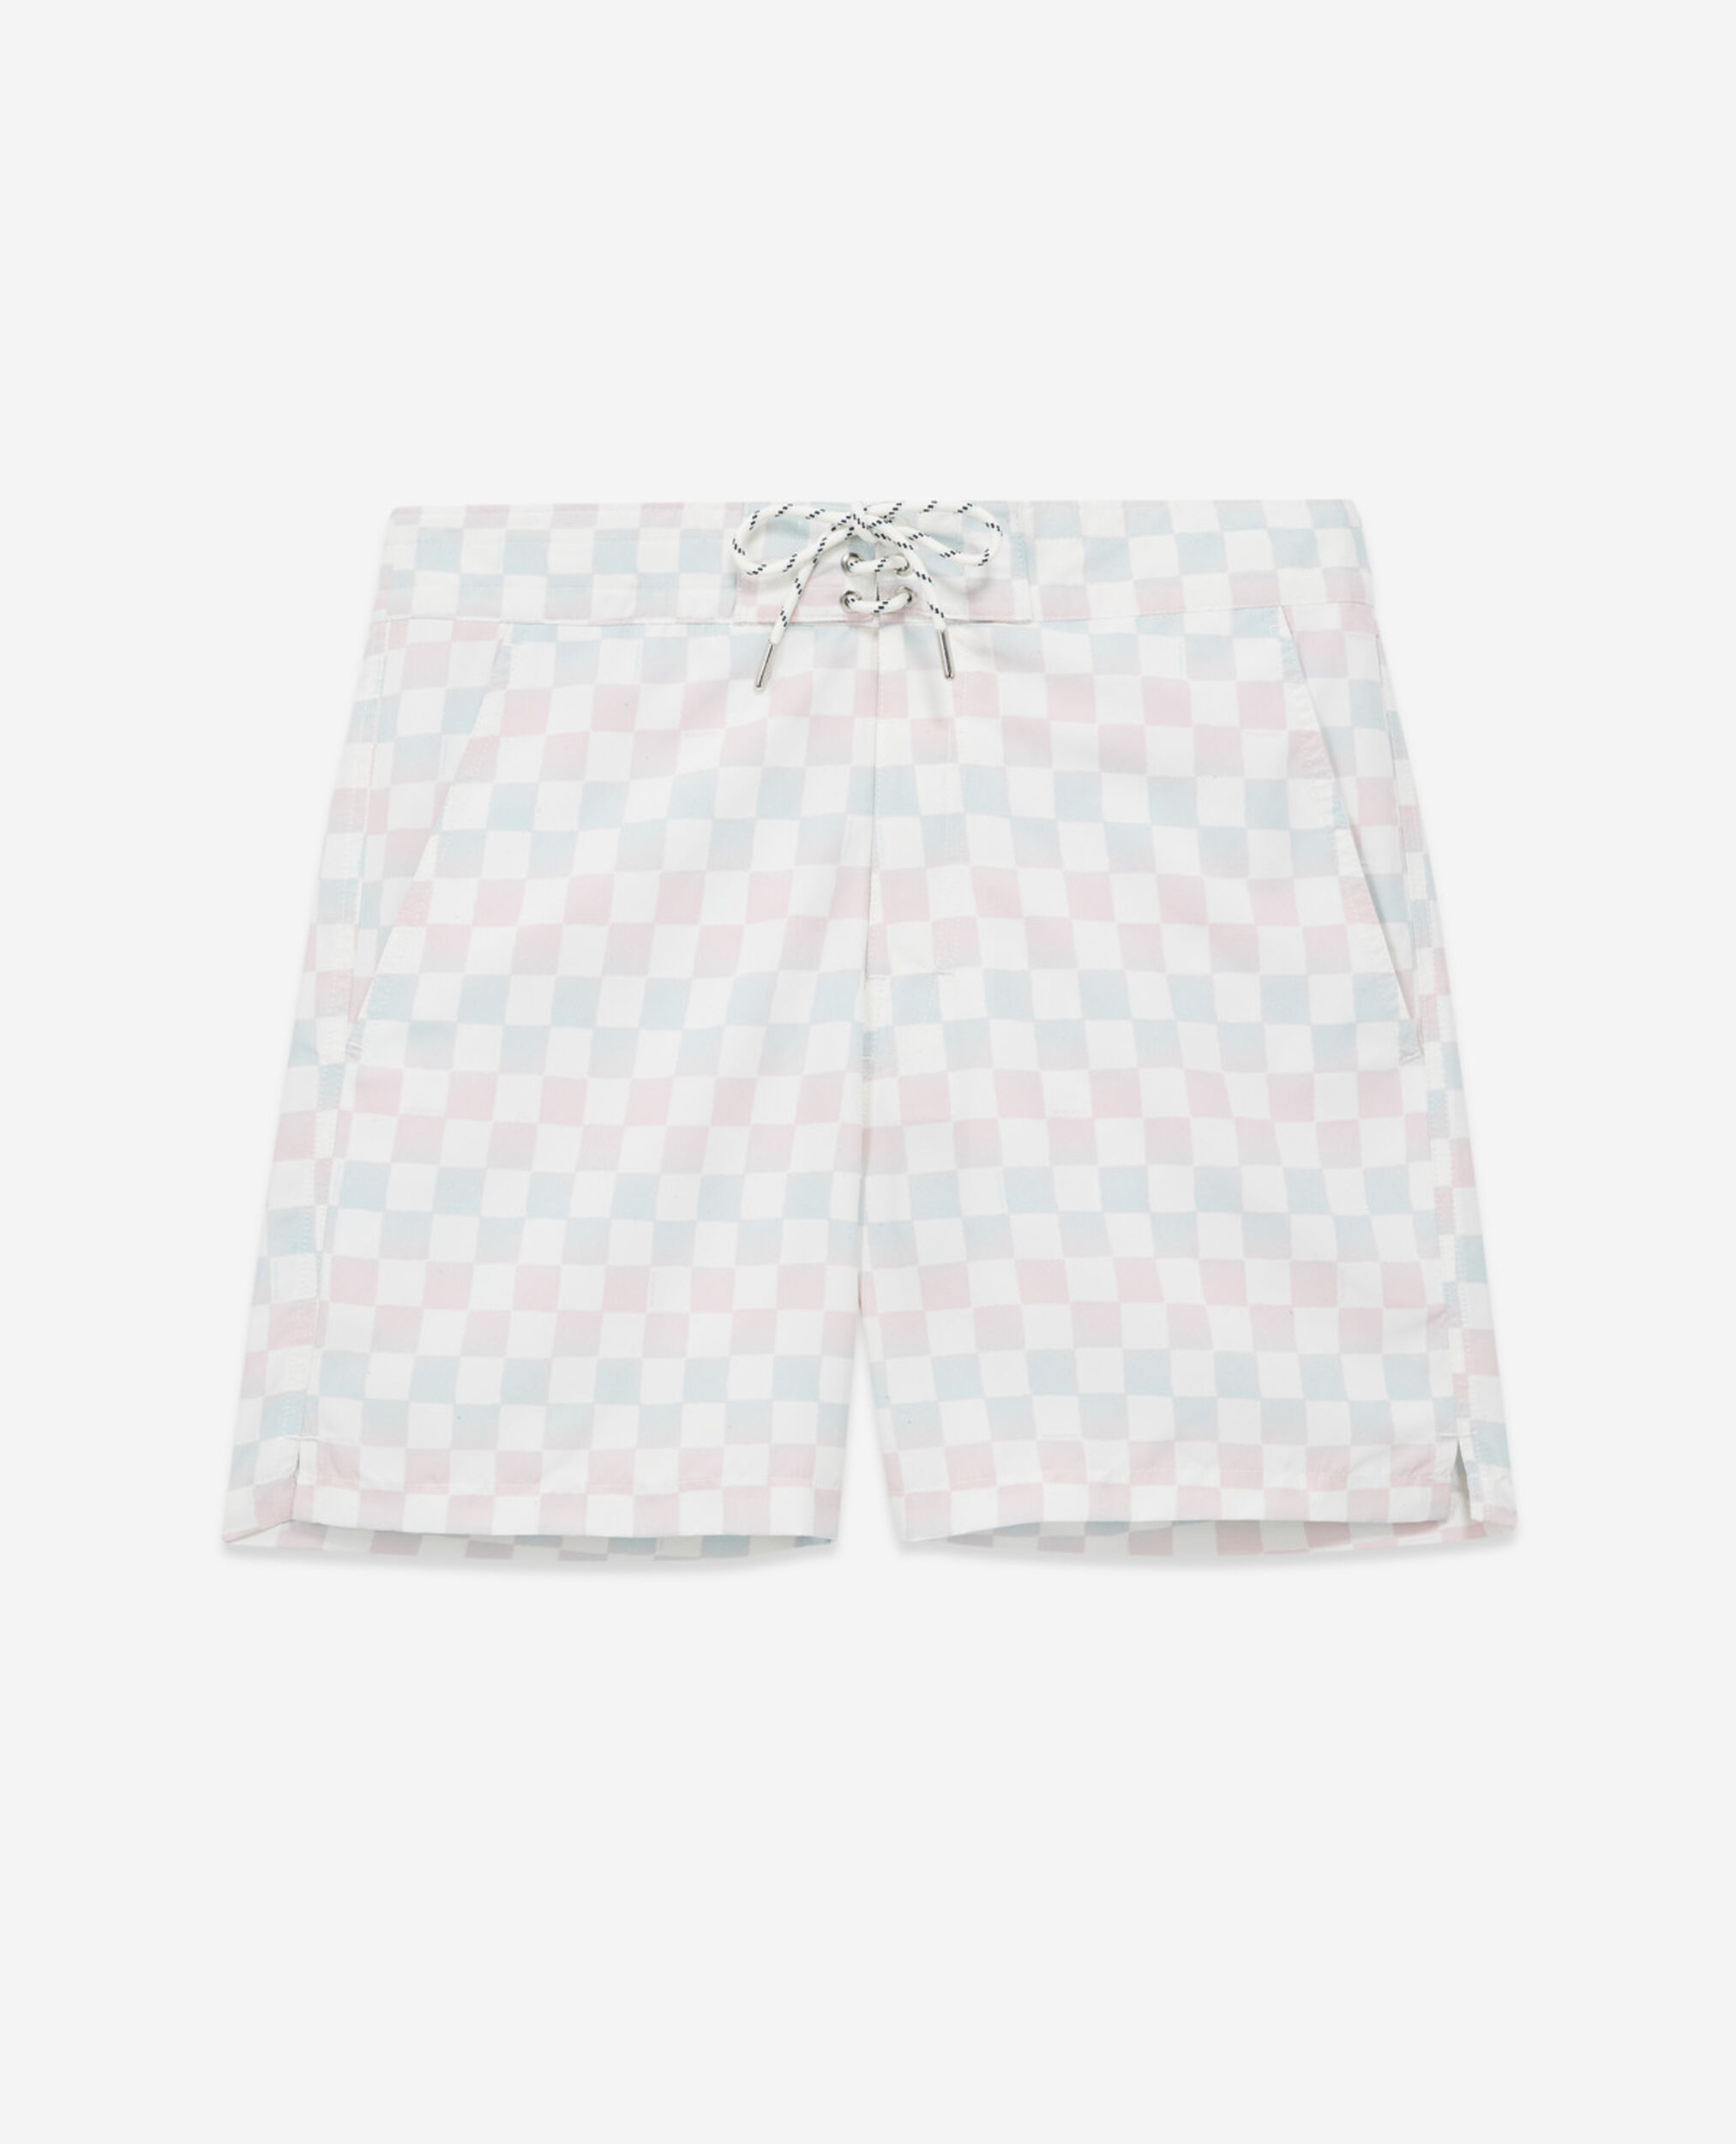 Long cut swim shorts with check motif, BLUE / ECRU, hi-res image number null